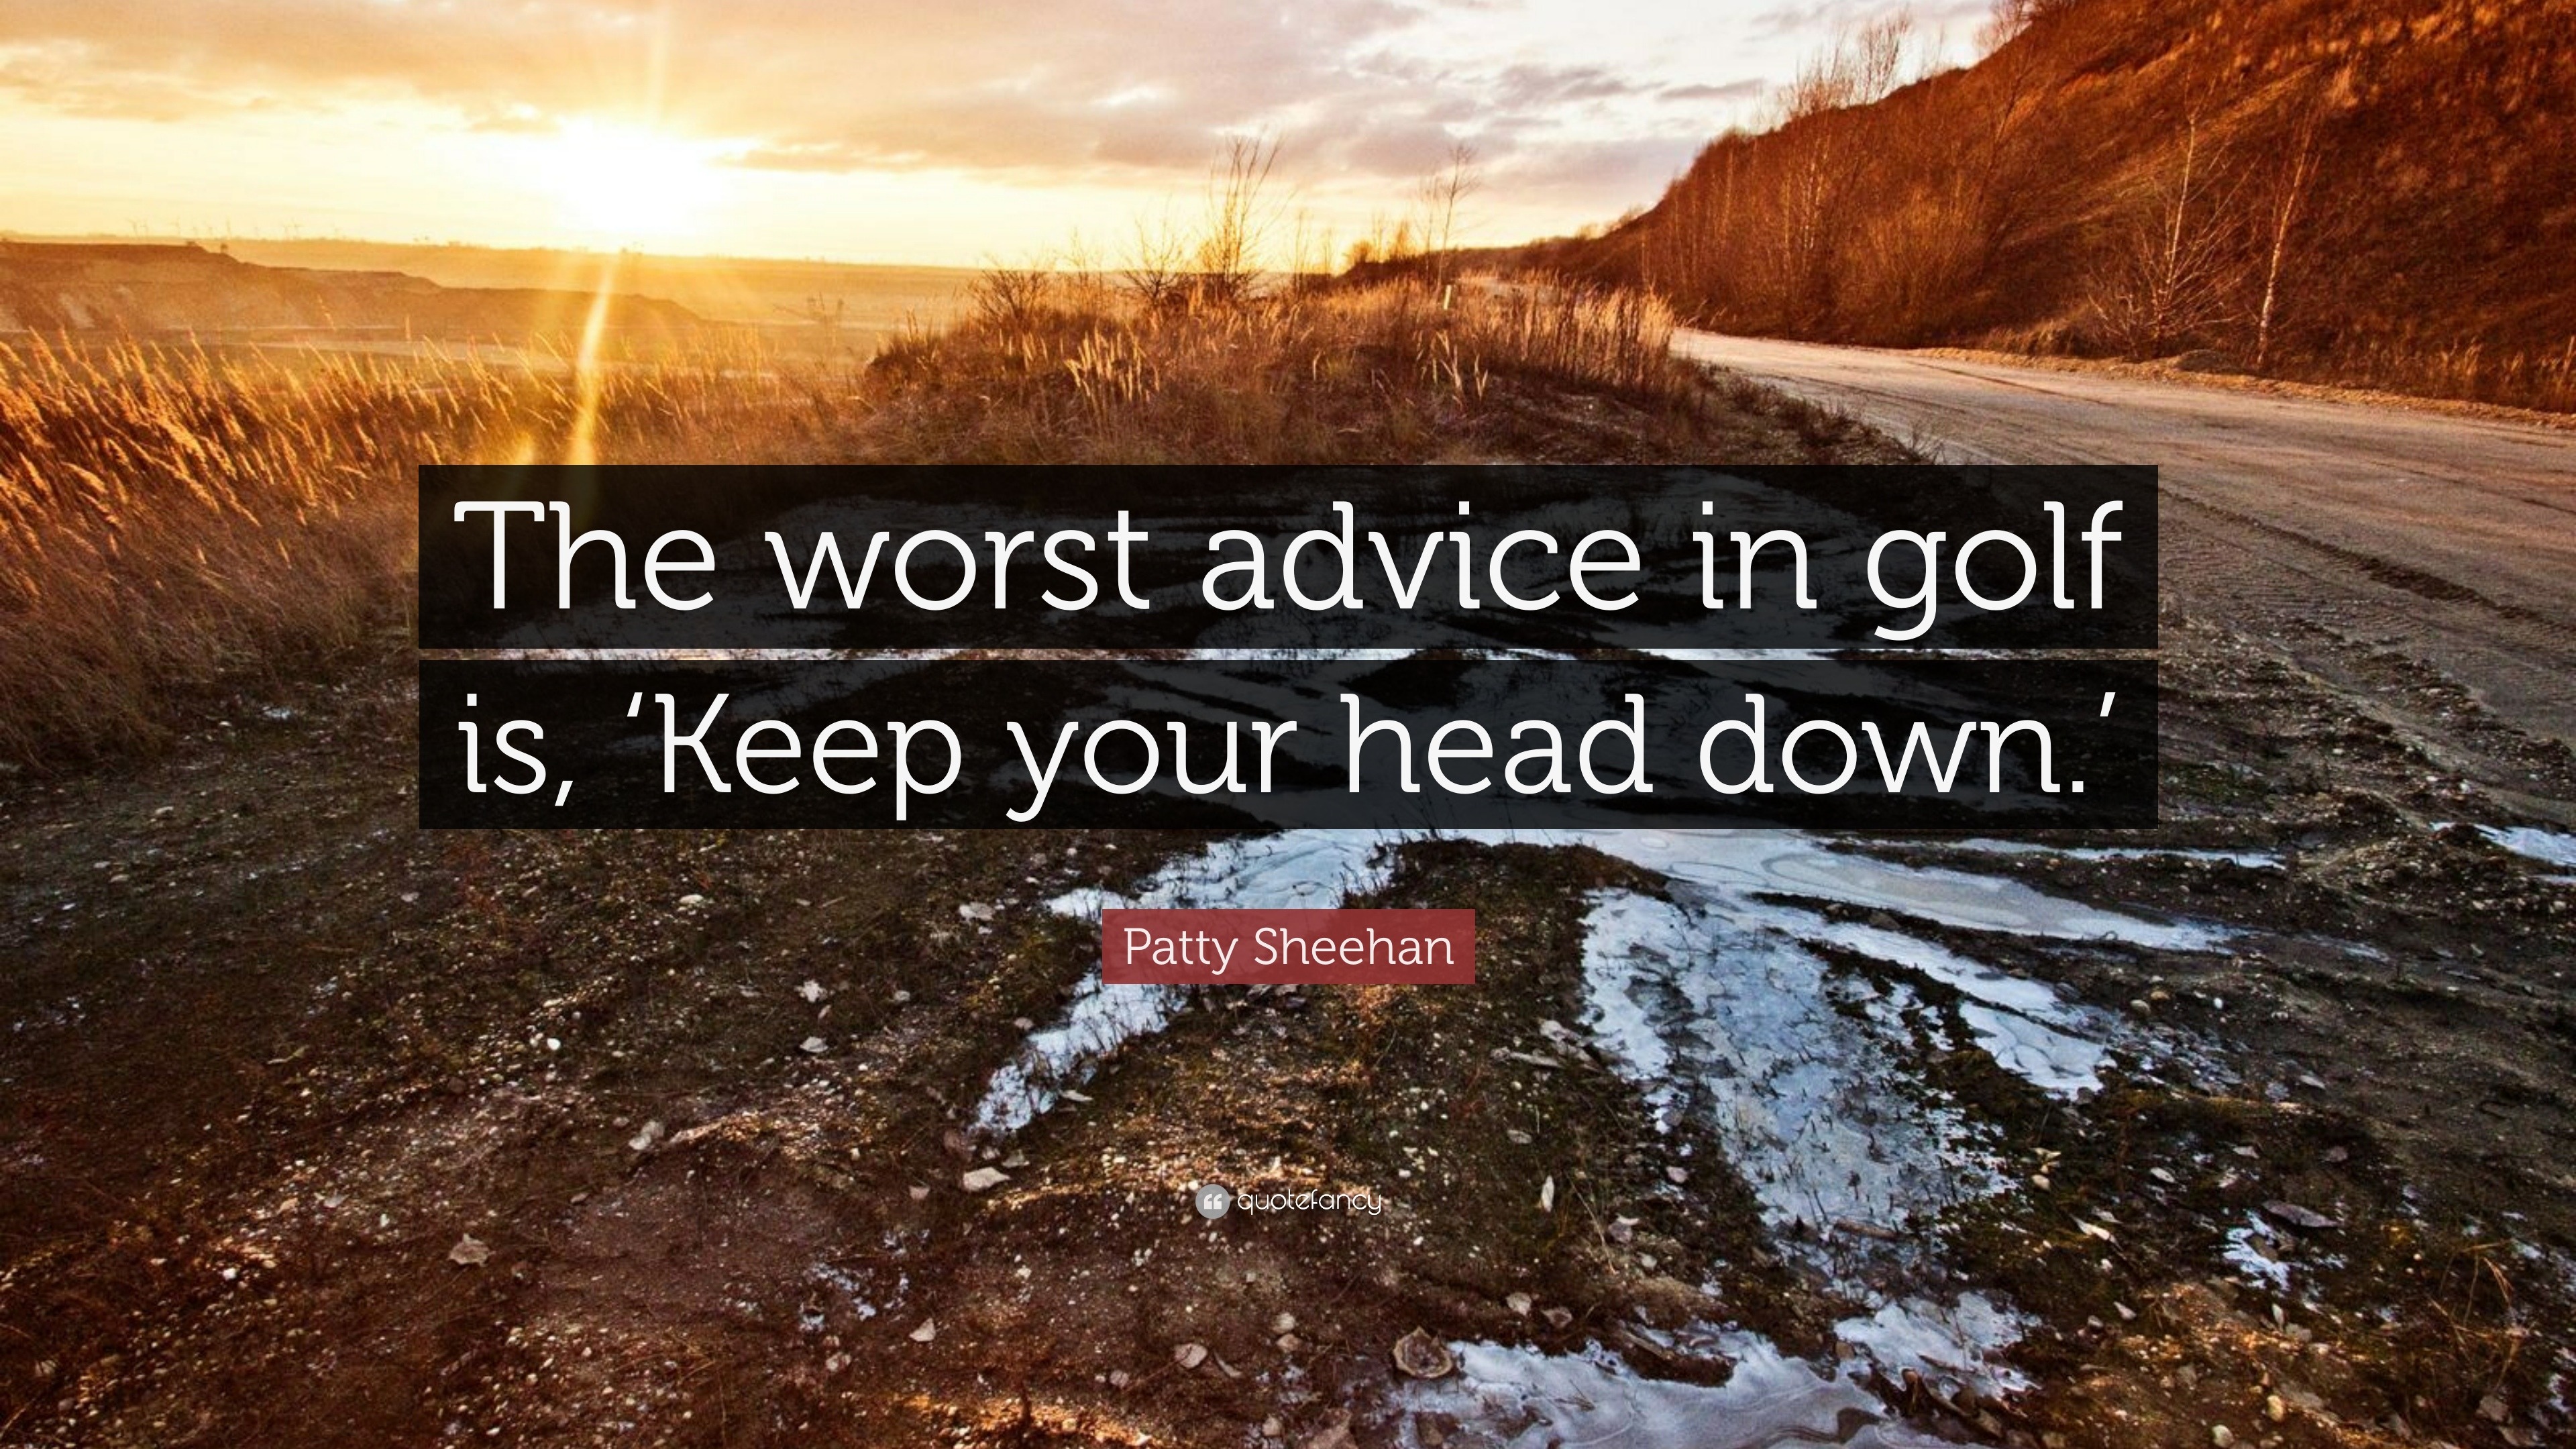 Patty Sheehan Quote: “The worst advice in golf is, 'Keep your head down.'”